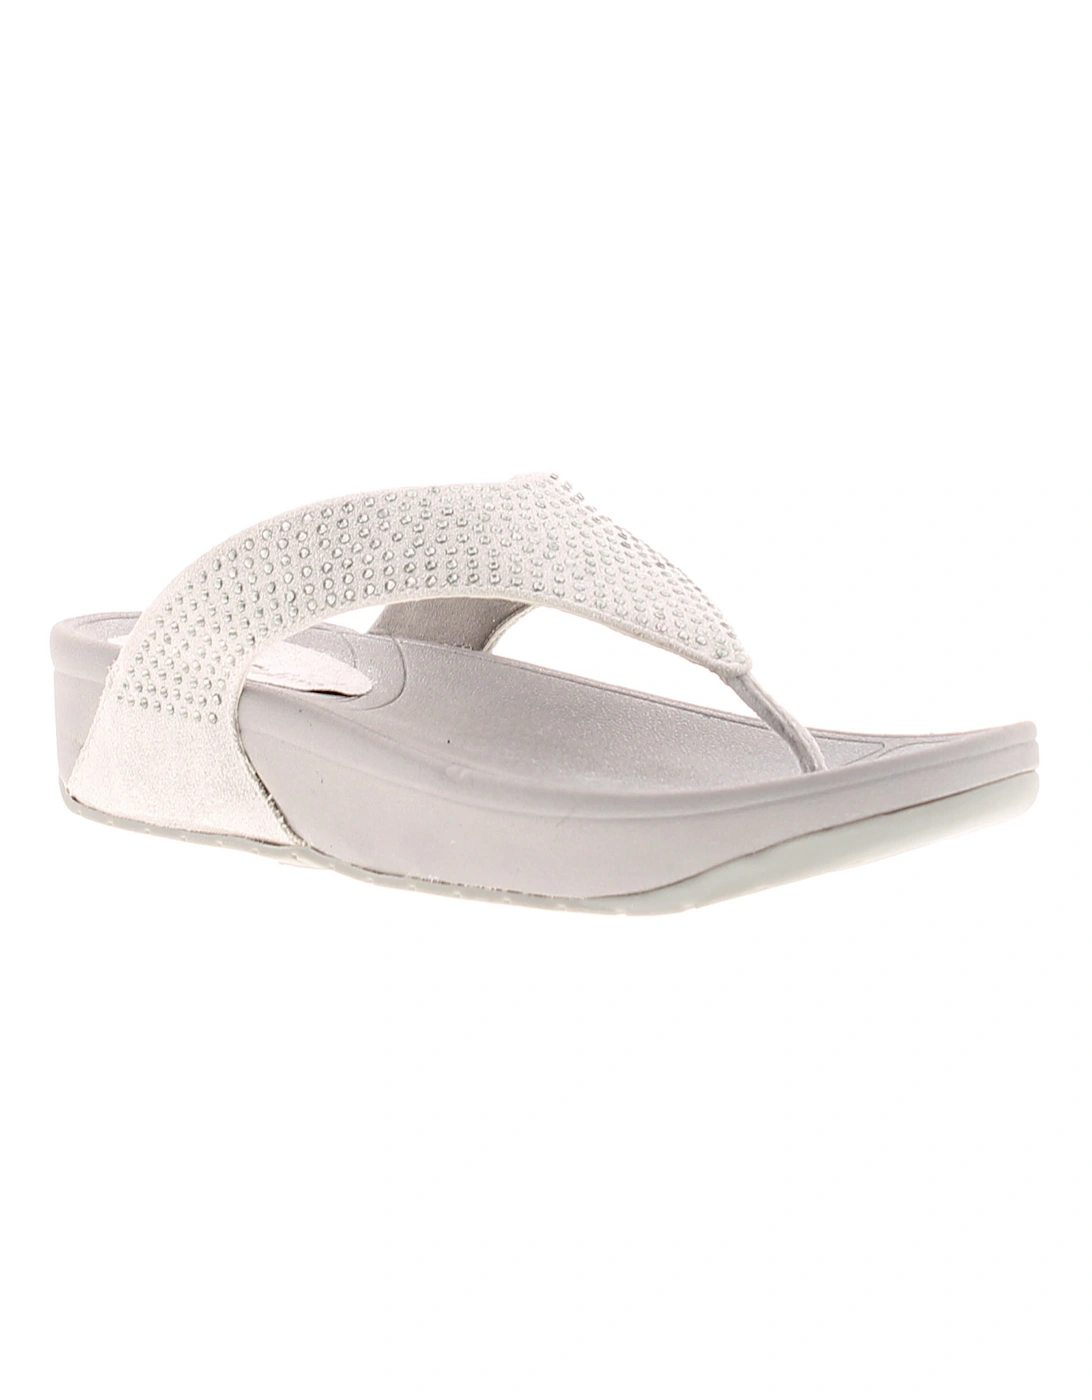 Womens Wedge Sandals Flick Slip On silver UK Size, 6 of 5